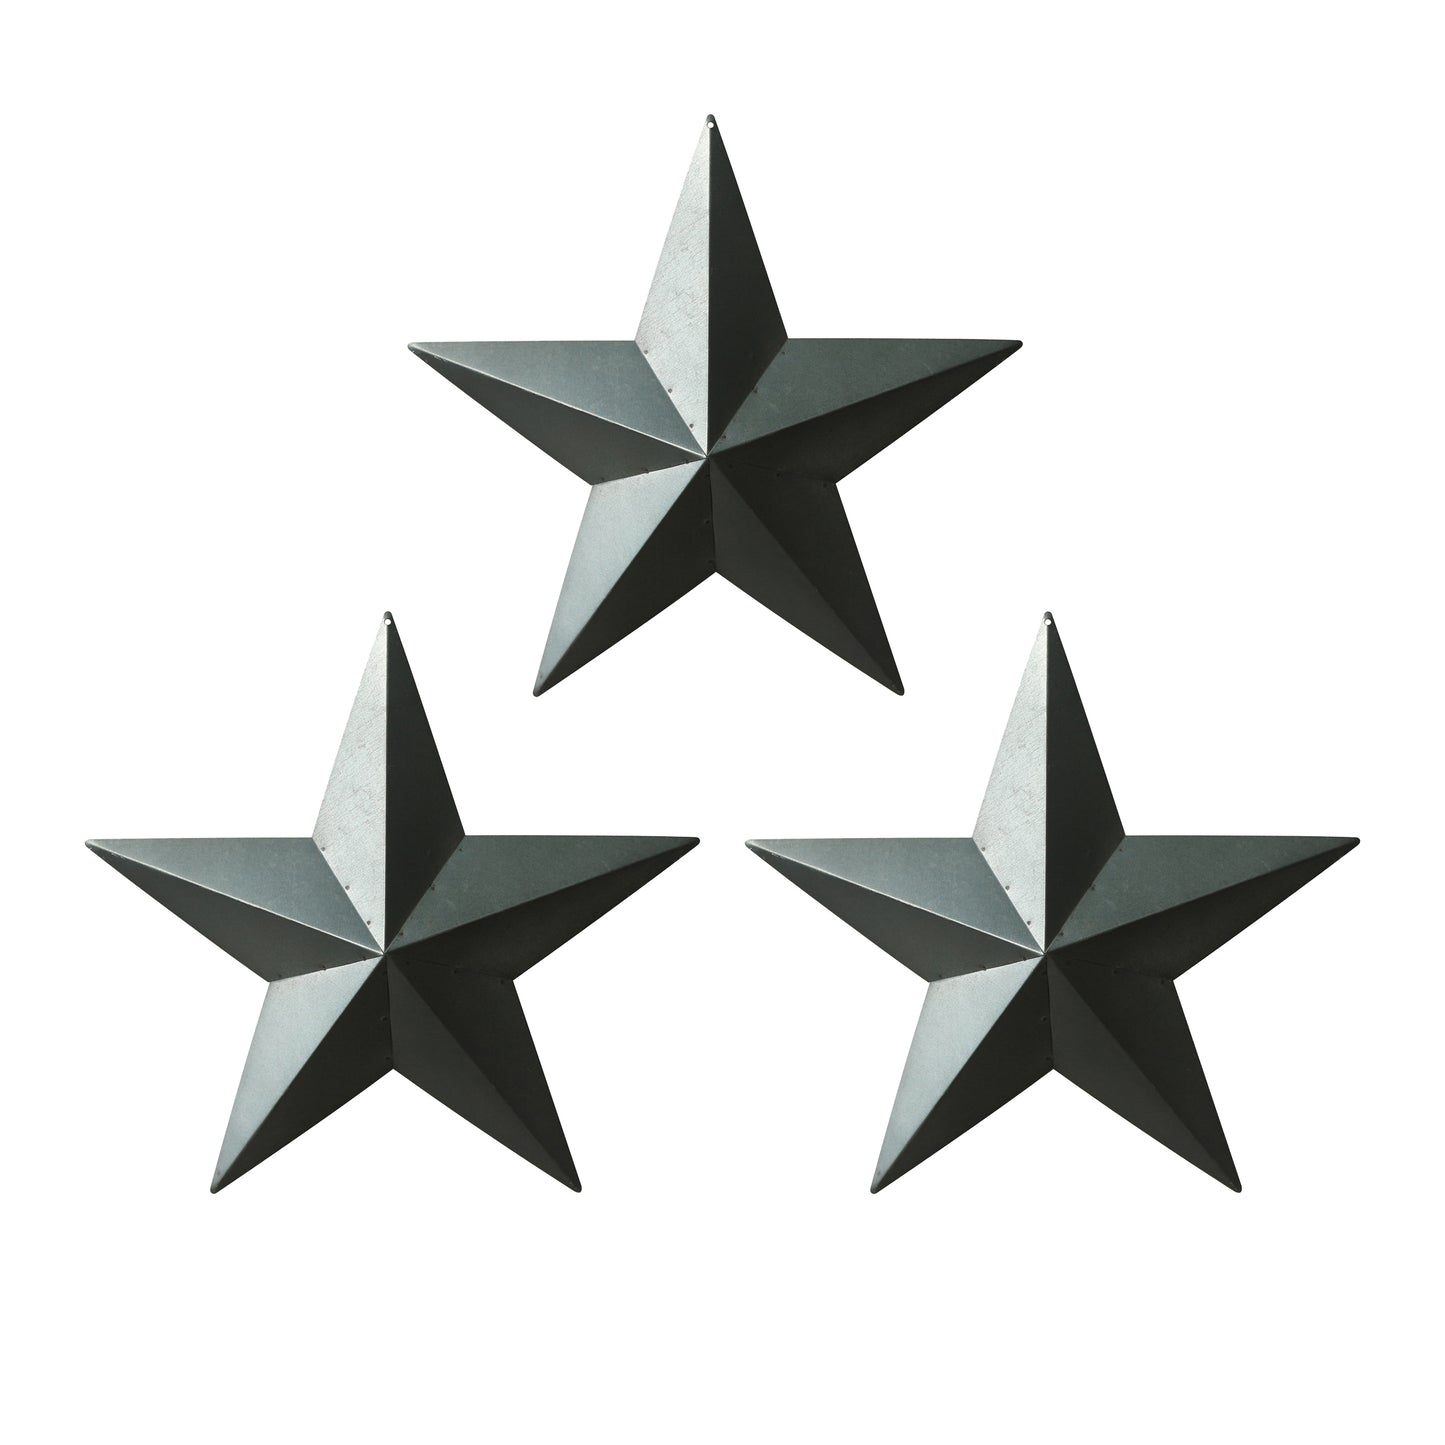 CVHOMEDECO. Country Rustic Antique Vintage Gifts Grungy Desert Sage Metal Barn Star Wall/Door Decor, 12 Inch, Set of 3.